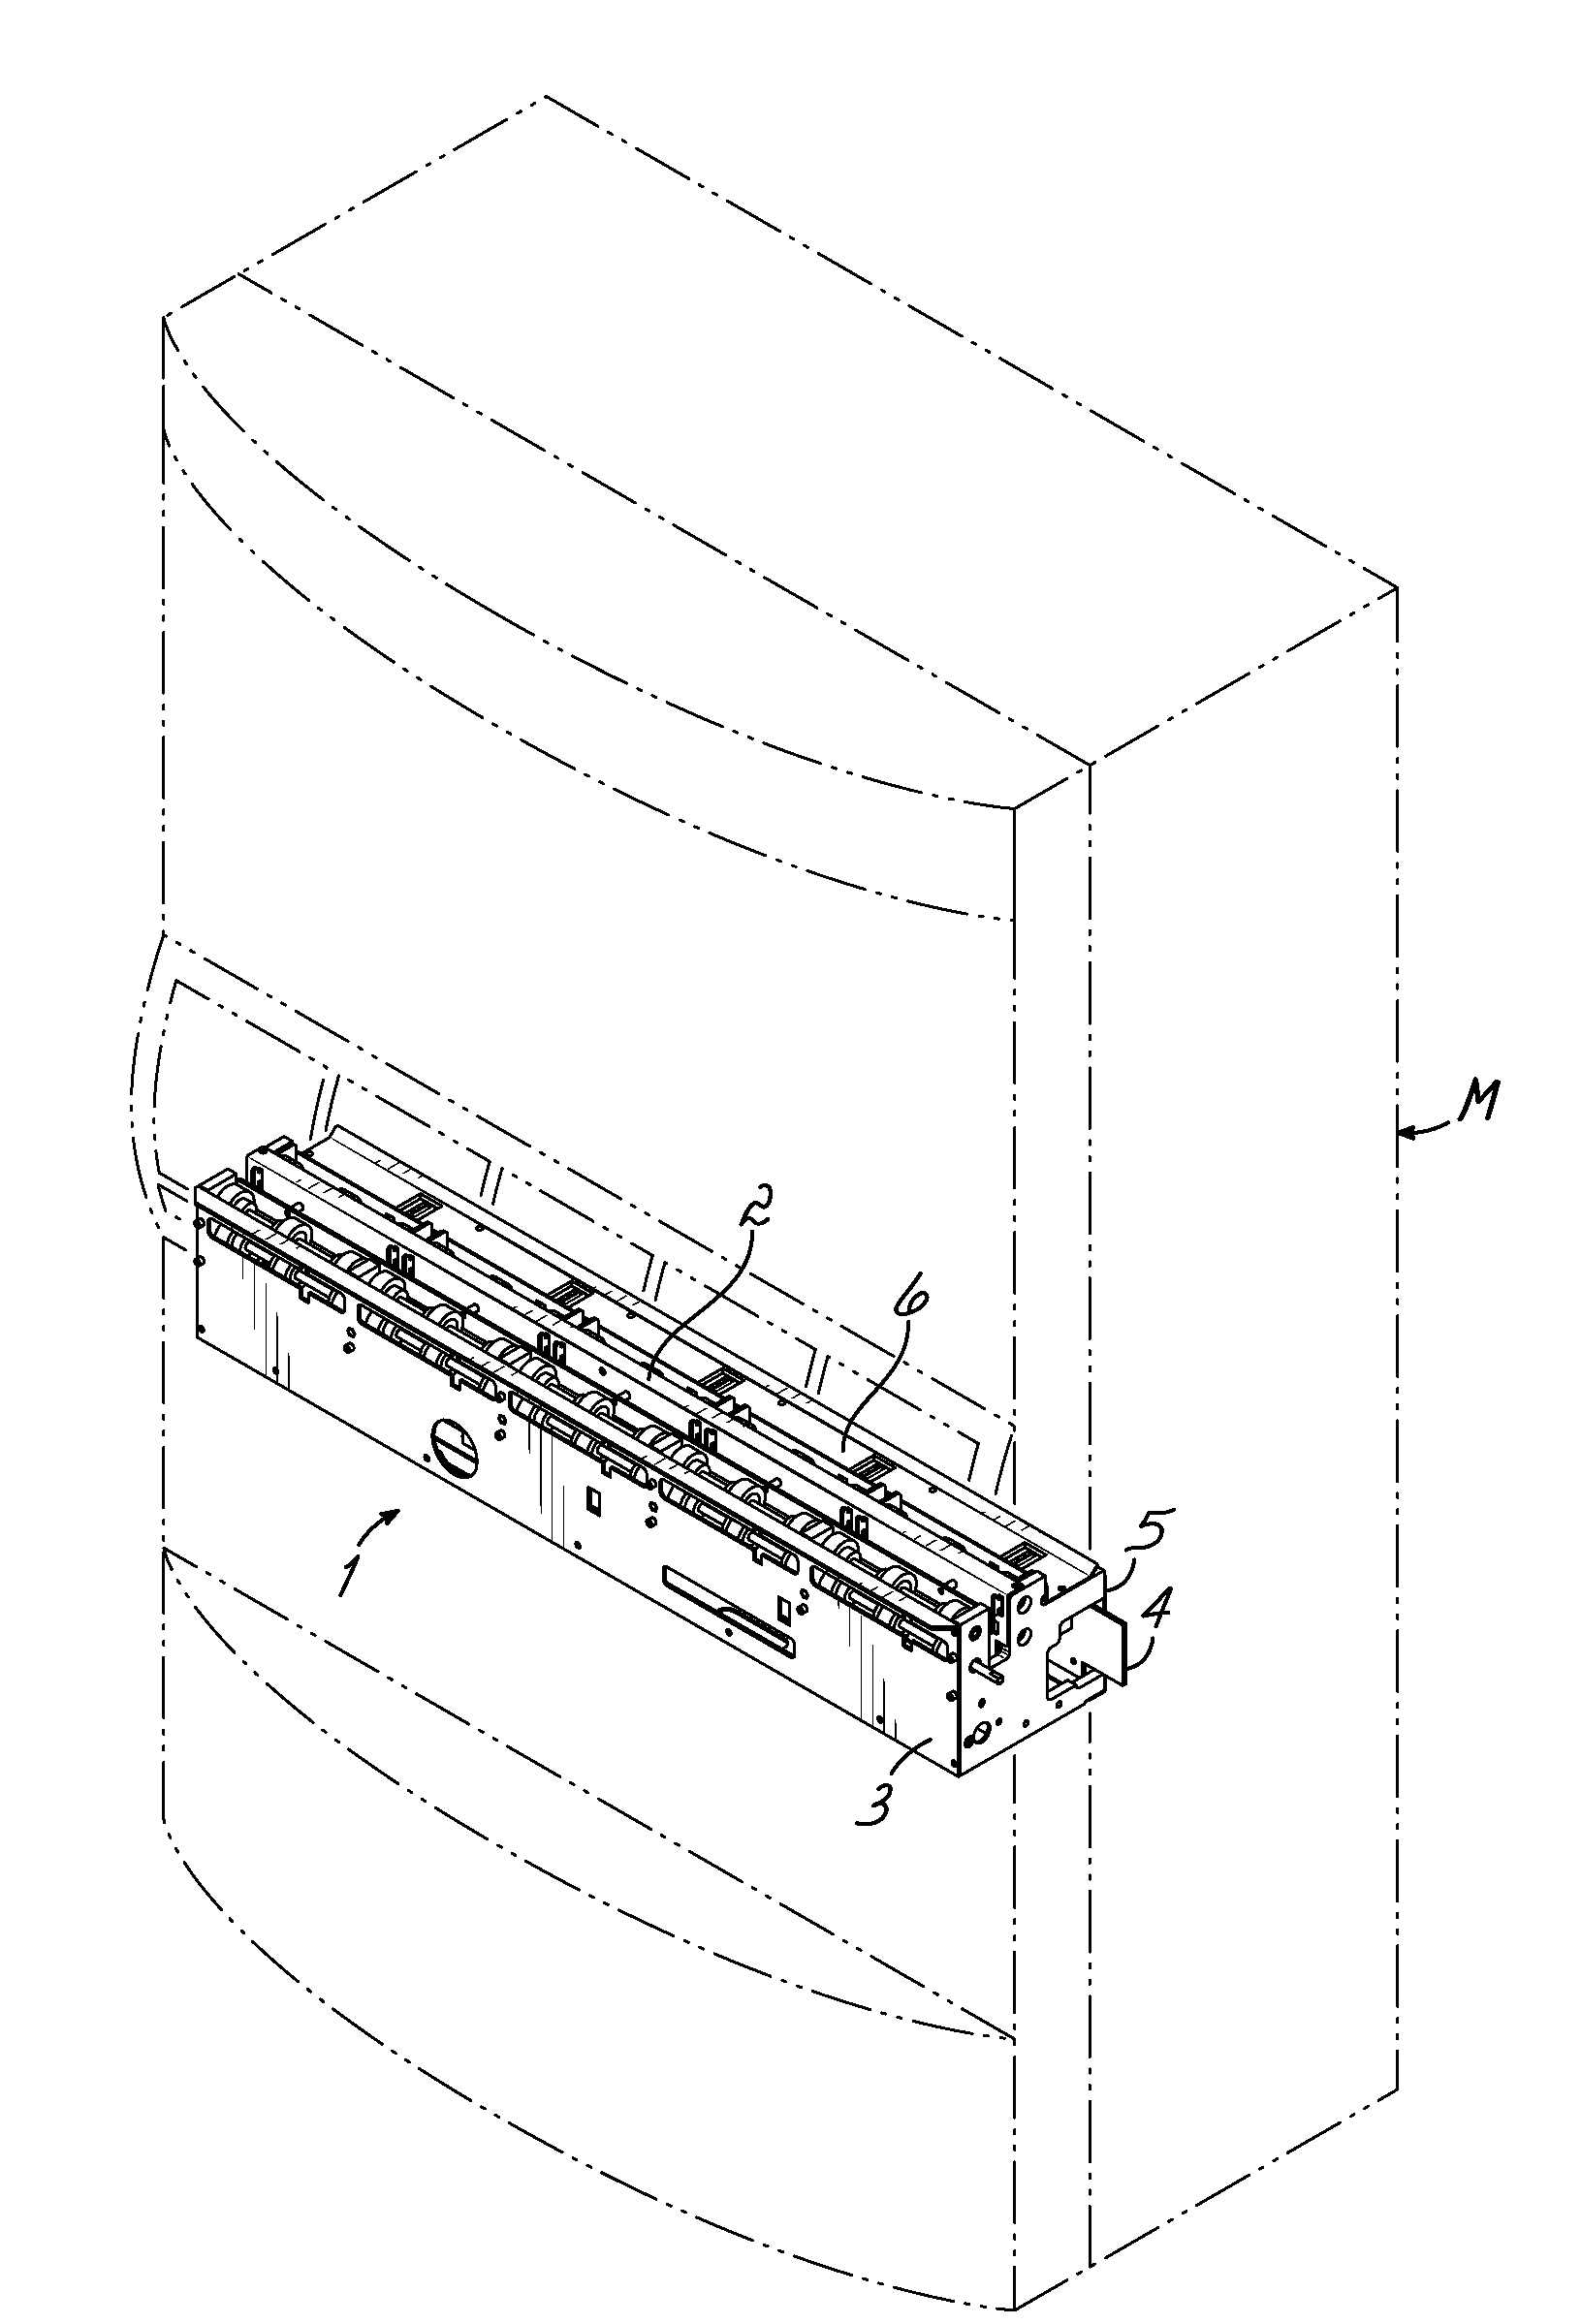 Multi-channel perforated ticket separation mechanism